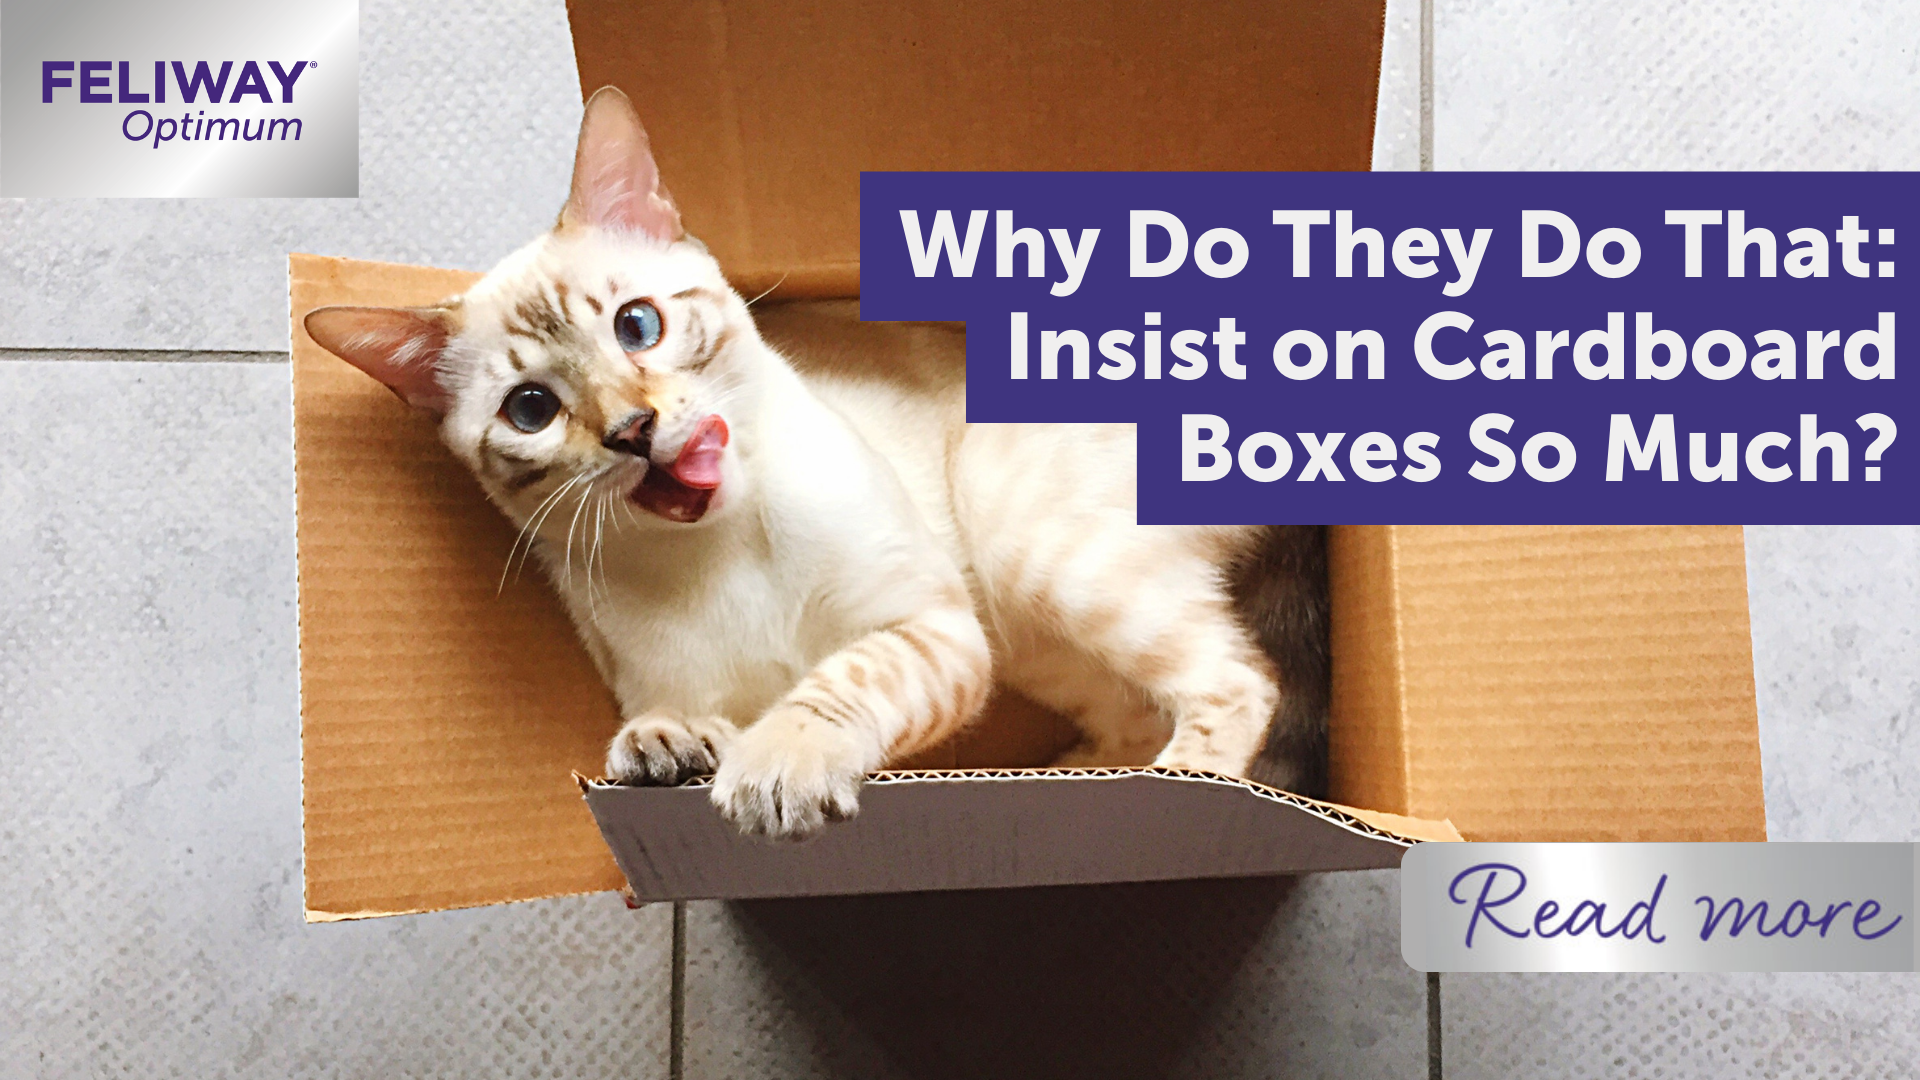 Why do they do that: insist on cardboard boxes so much?